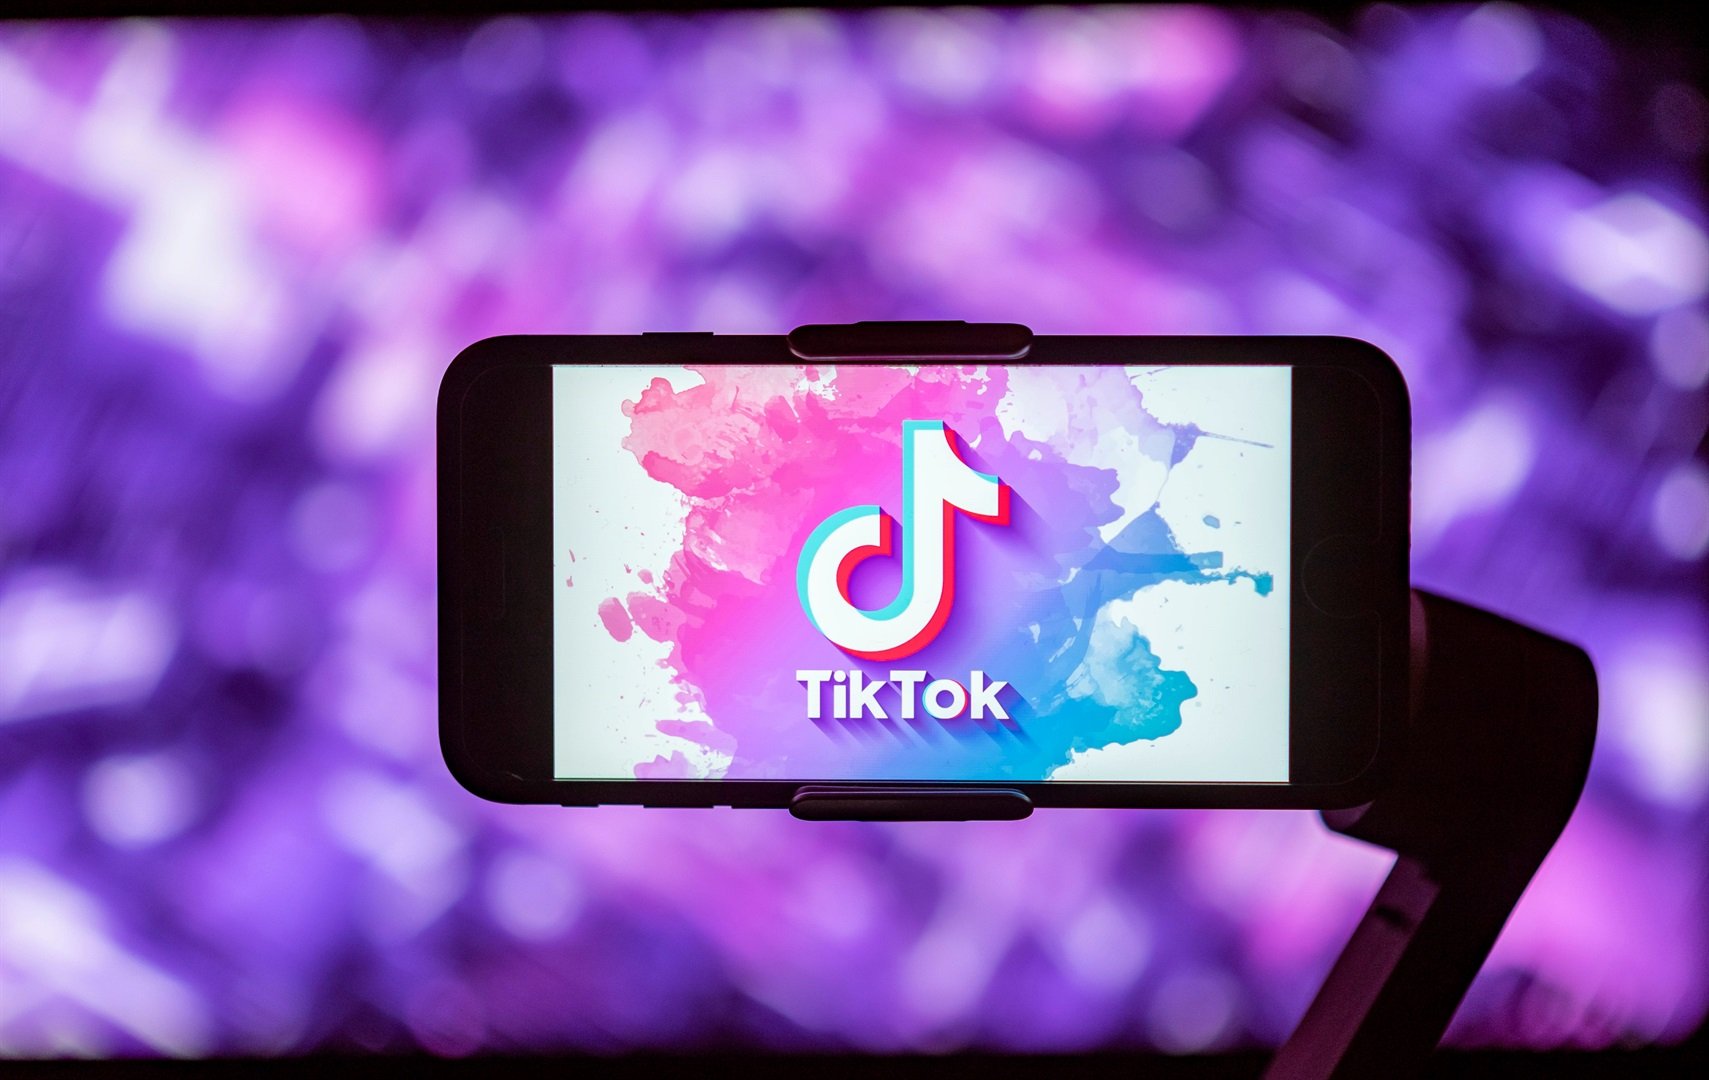 Canadian privacy protection regulators said on Thursday that they have launched an investigation into TikTok